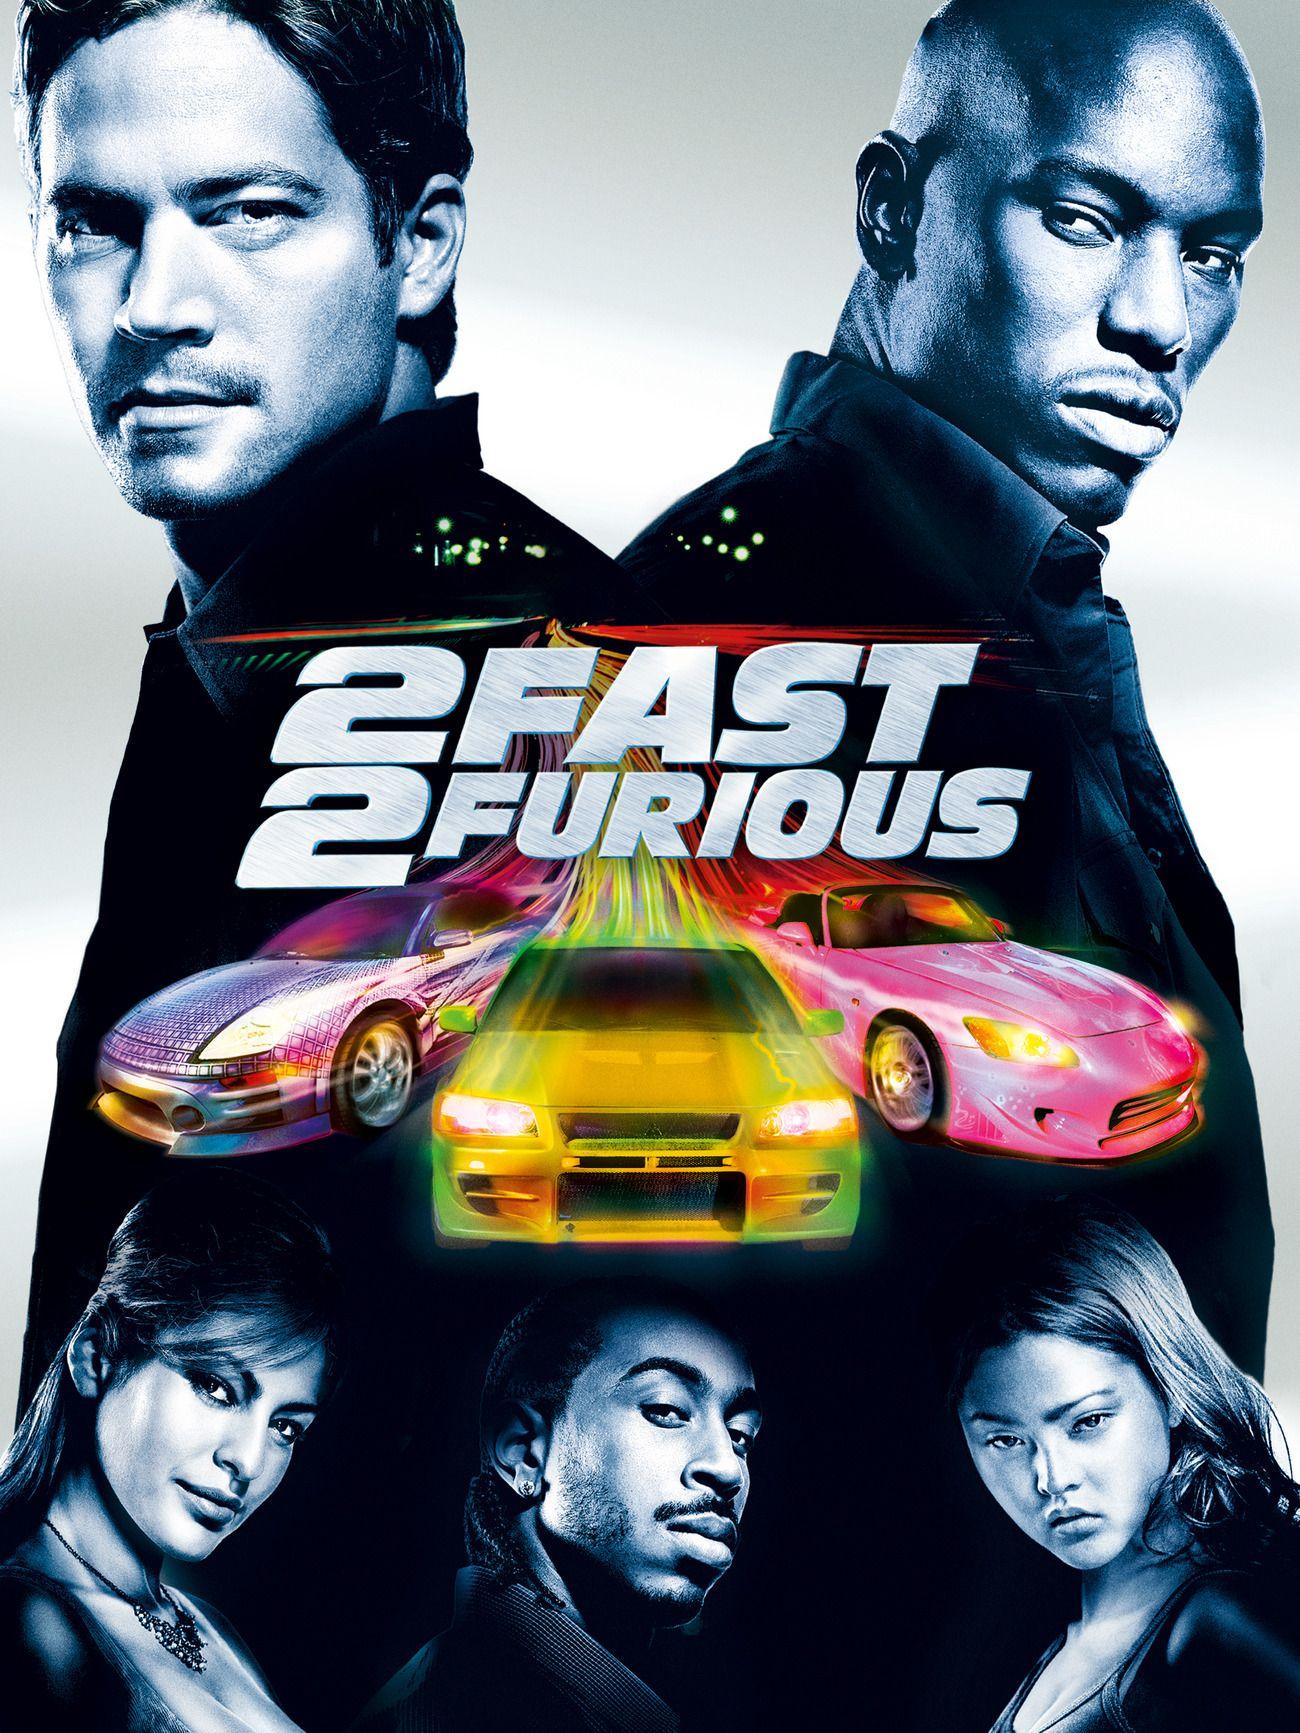 2 fast 2 furious downloadable clips